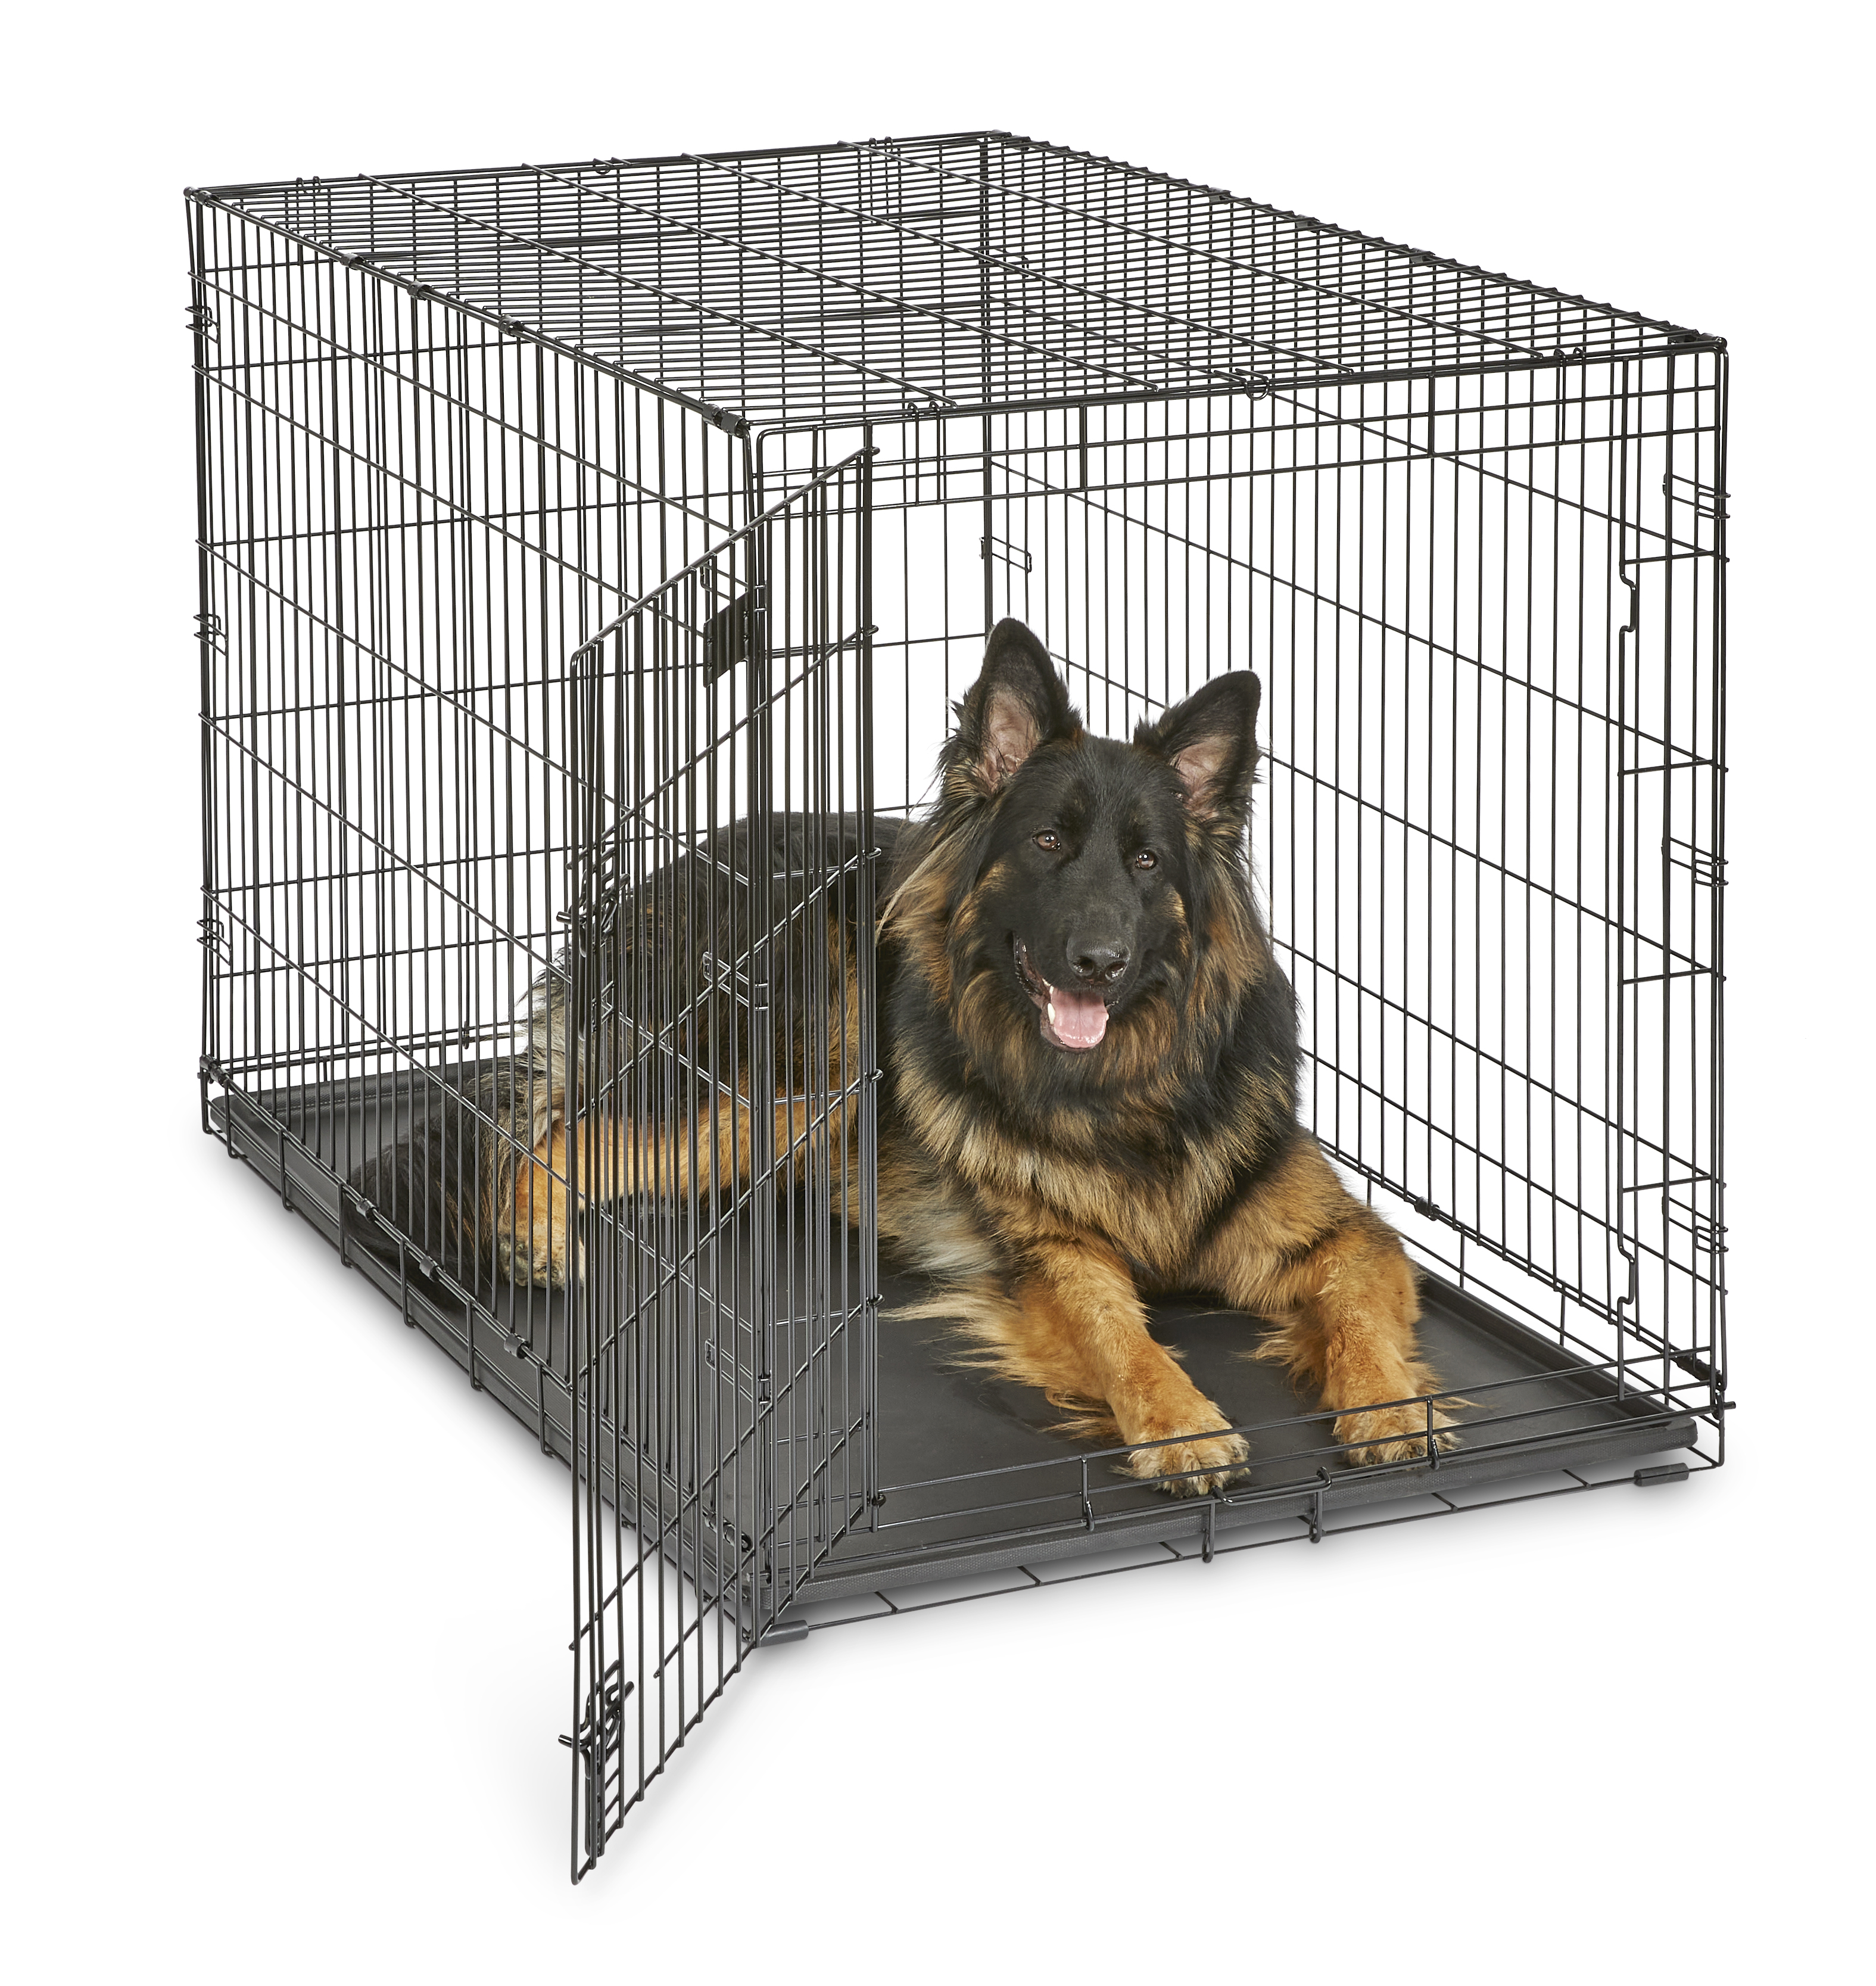 MidWest Homes for Pets Newly Enhanced Single Door iCrate Dog Crate, Includes Leak-Proof Pan, Floor Protecting Feet, Divider Panel & New Patented, 42 Inch - image 2 of 8